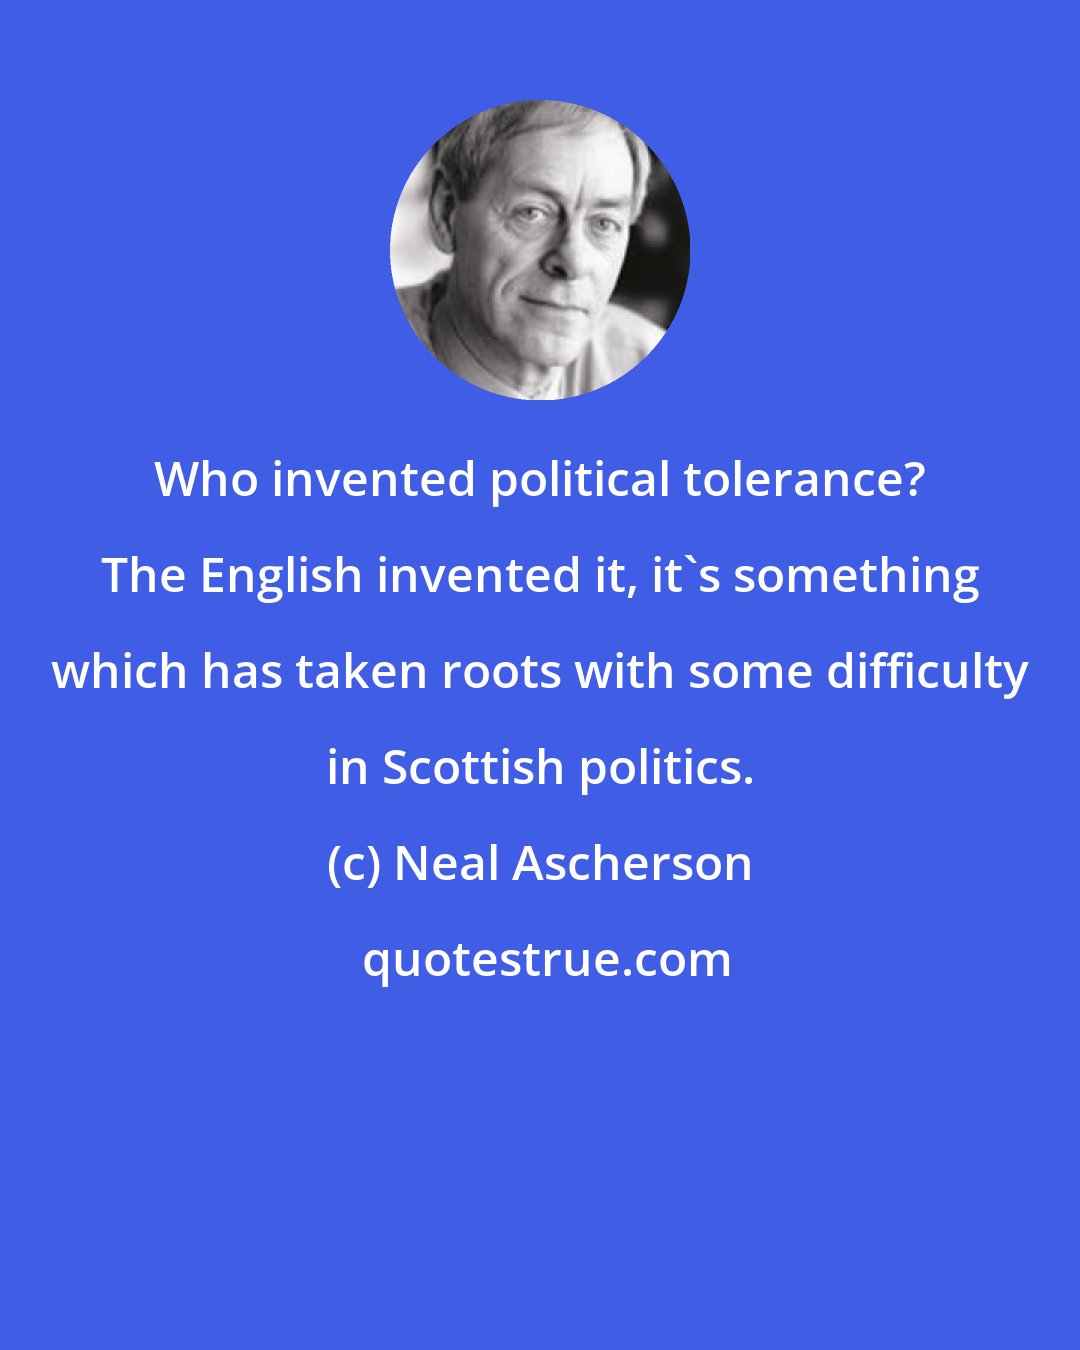 Neal Ascherson: Who invented political tolerance? The English invented it, it's something which has taken roots with some difficulty in Scottish politics.